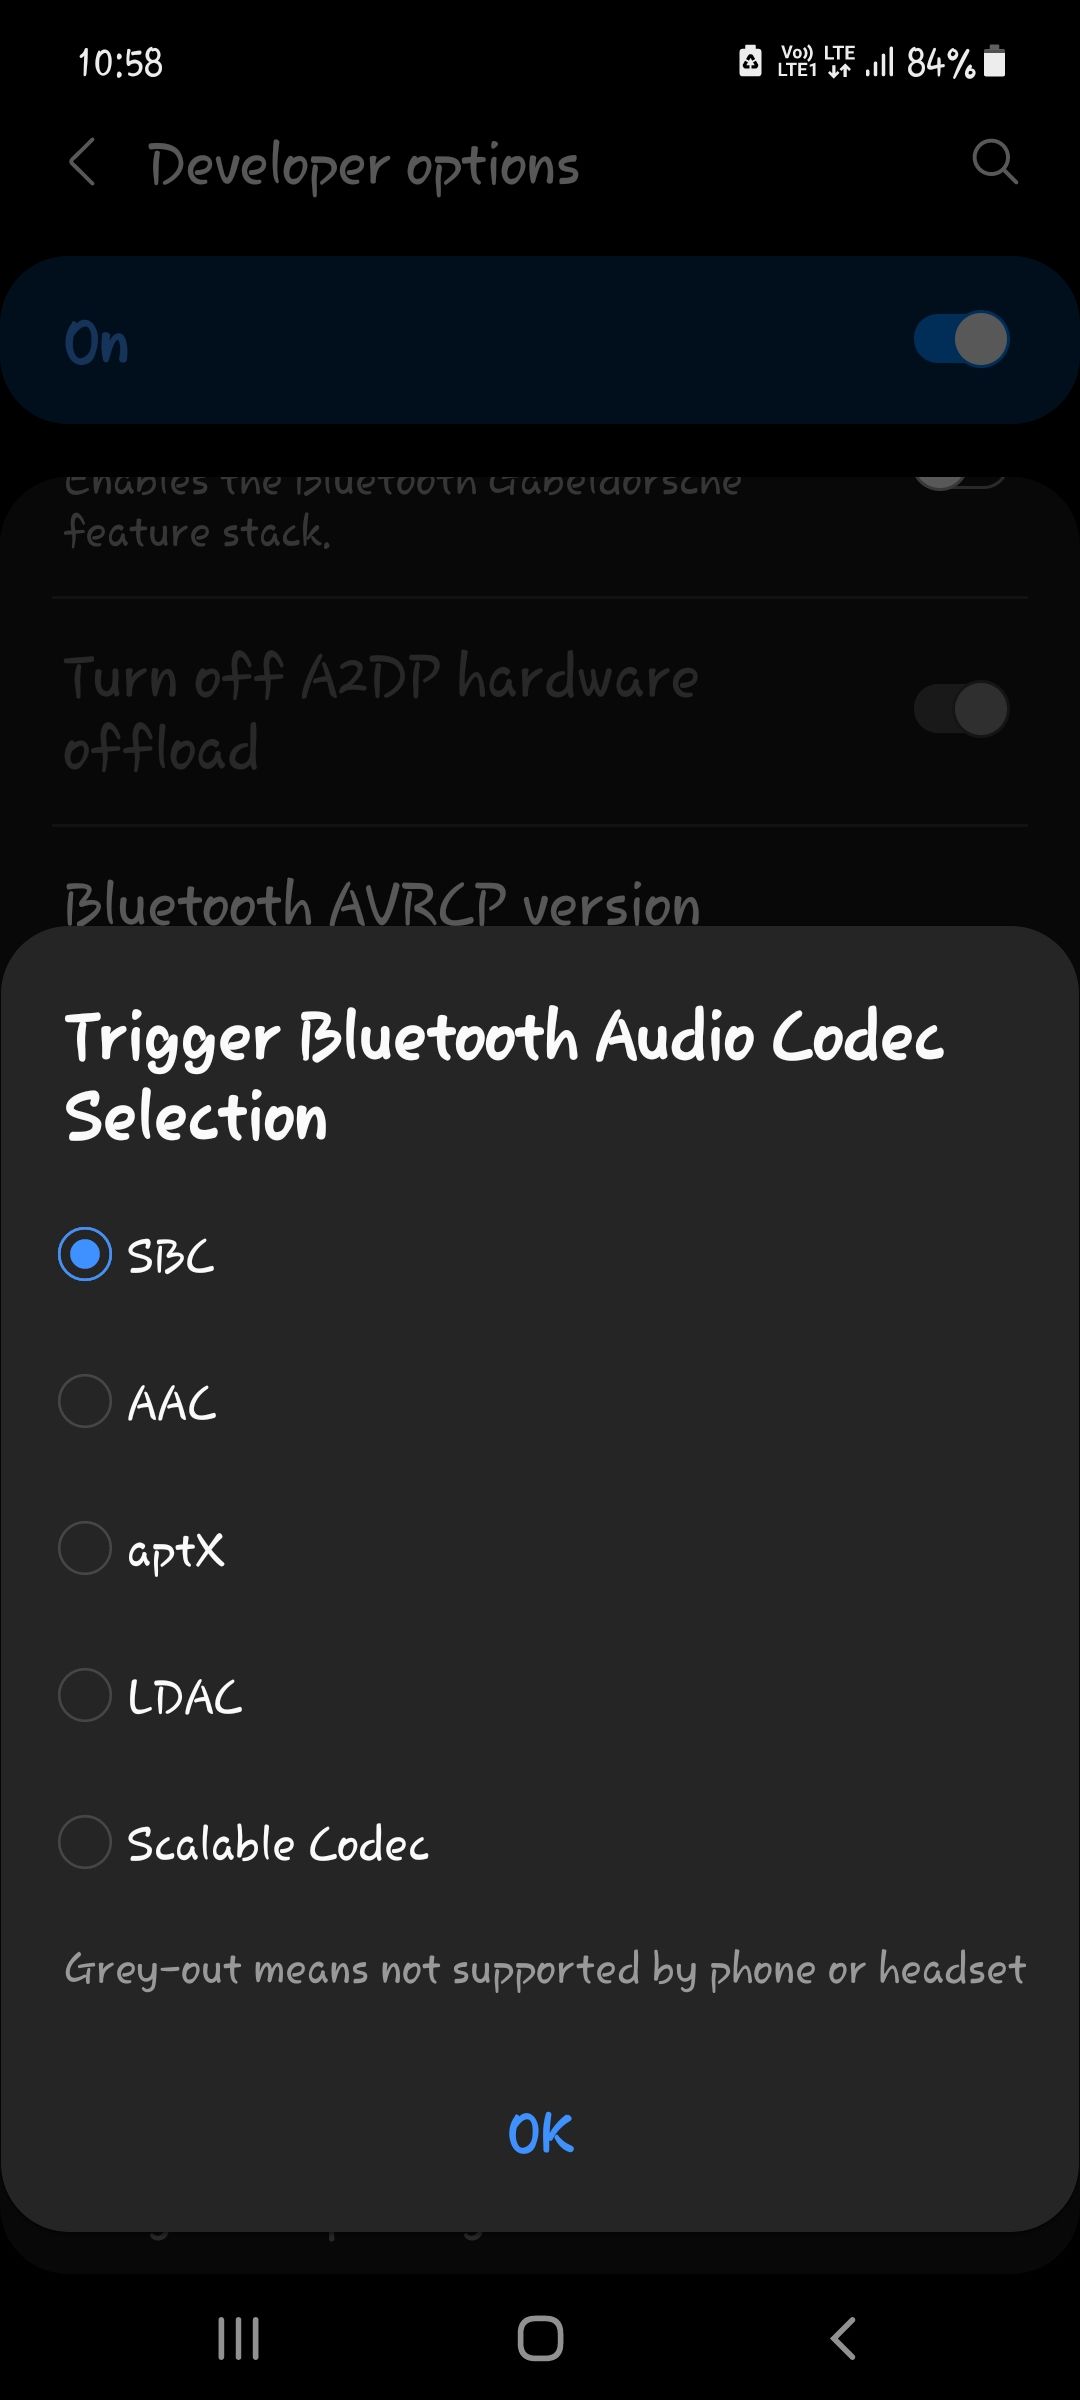 Aptx hd support for m31 - Samsung Members